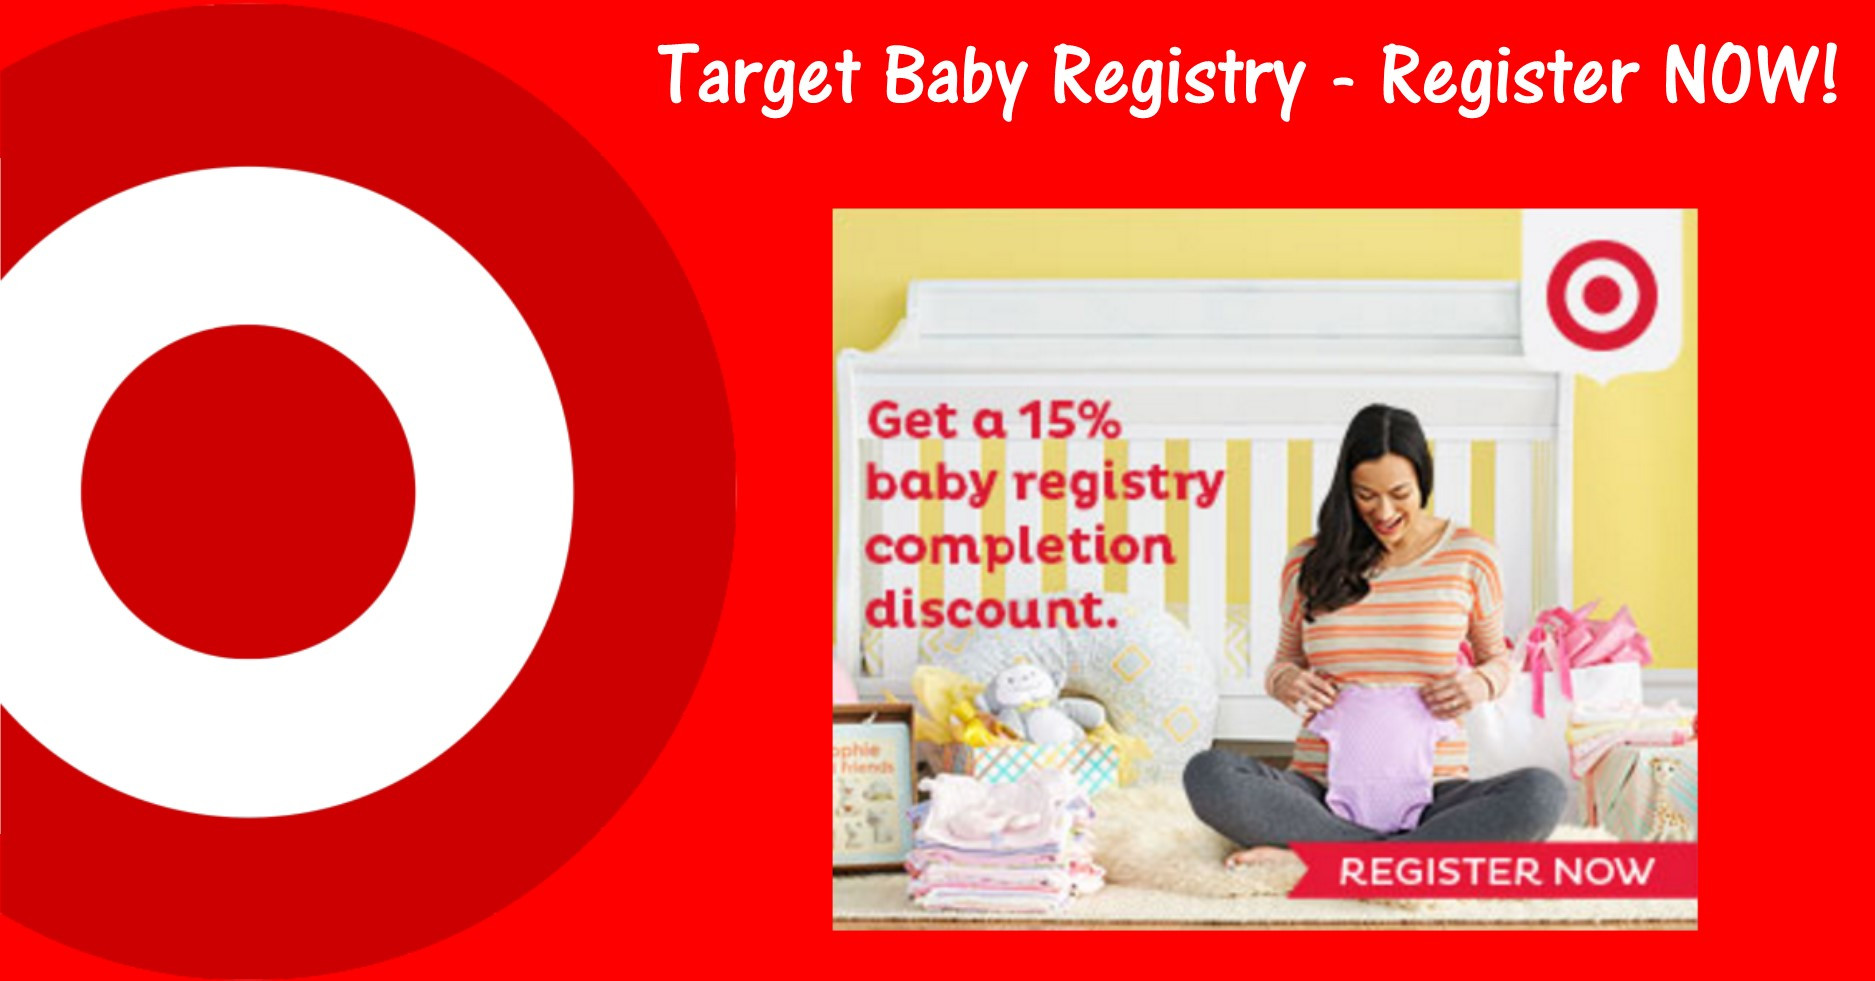 Target Gift Registry For Baby
 Tar Baby Registry FREE Coupons and Handpicked Samples